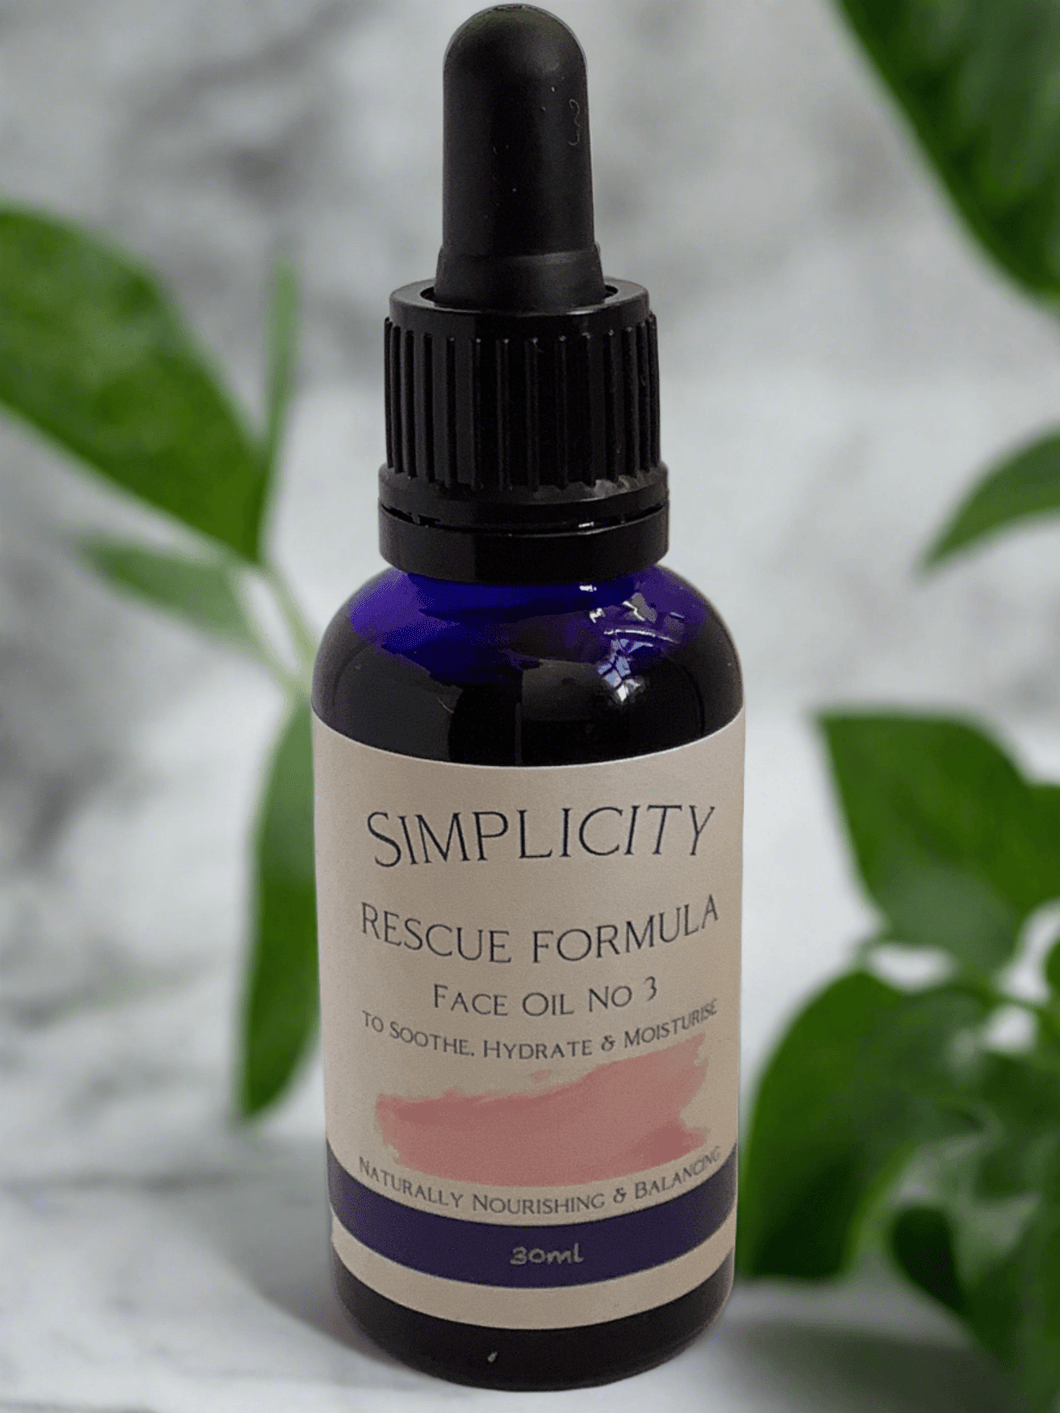 Soap Matters Health & Beauty 30ml Simplicity Face Oil No3 - to Soothe, Hydrate & Moisturise